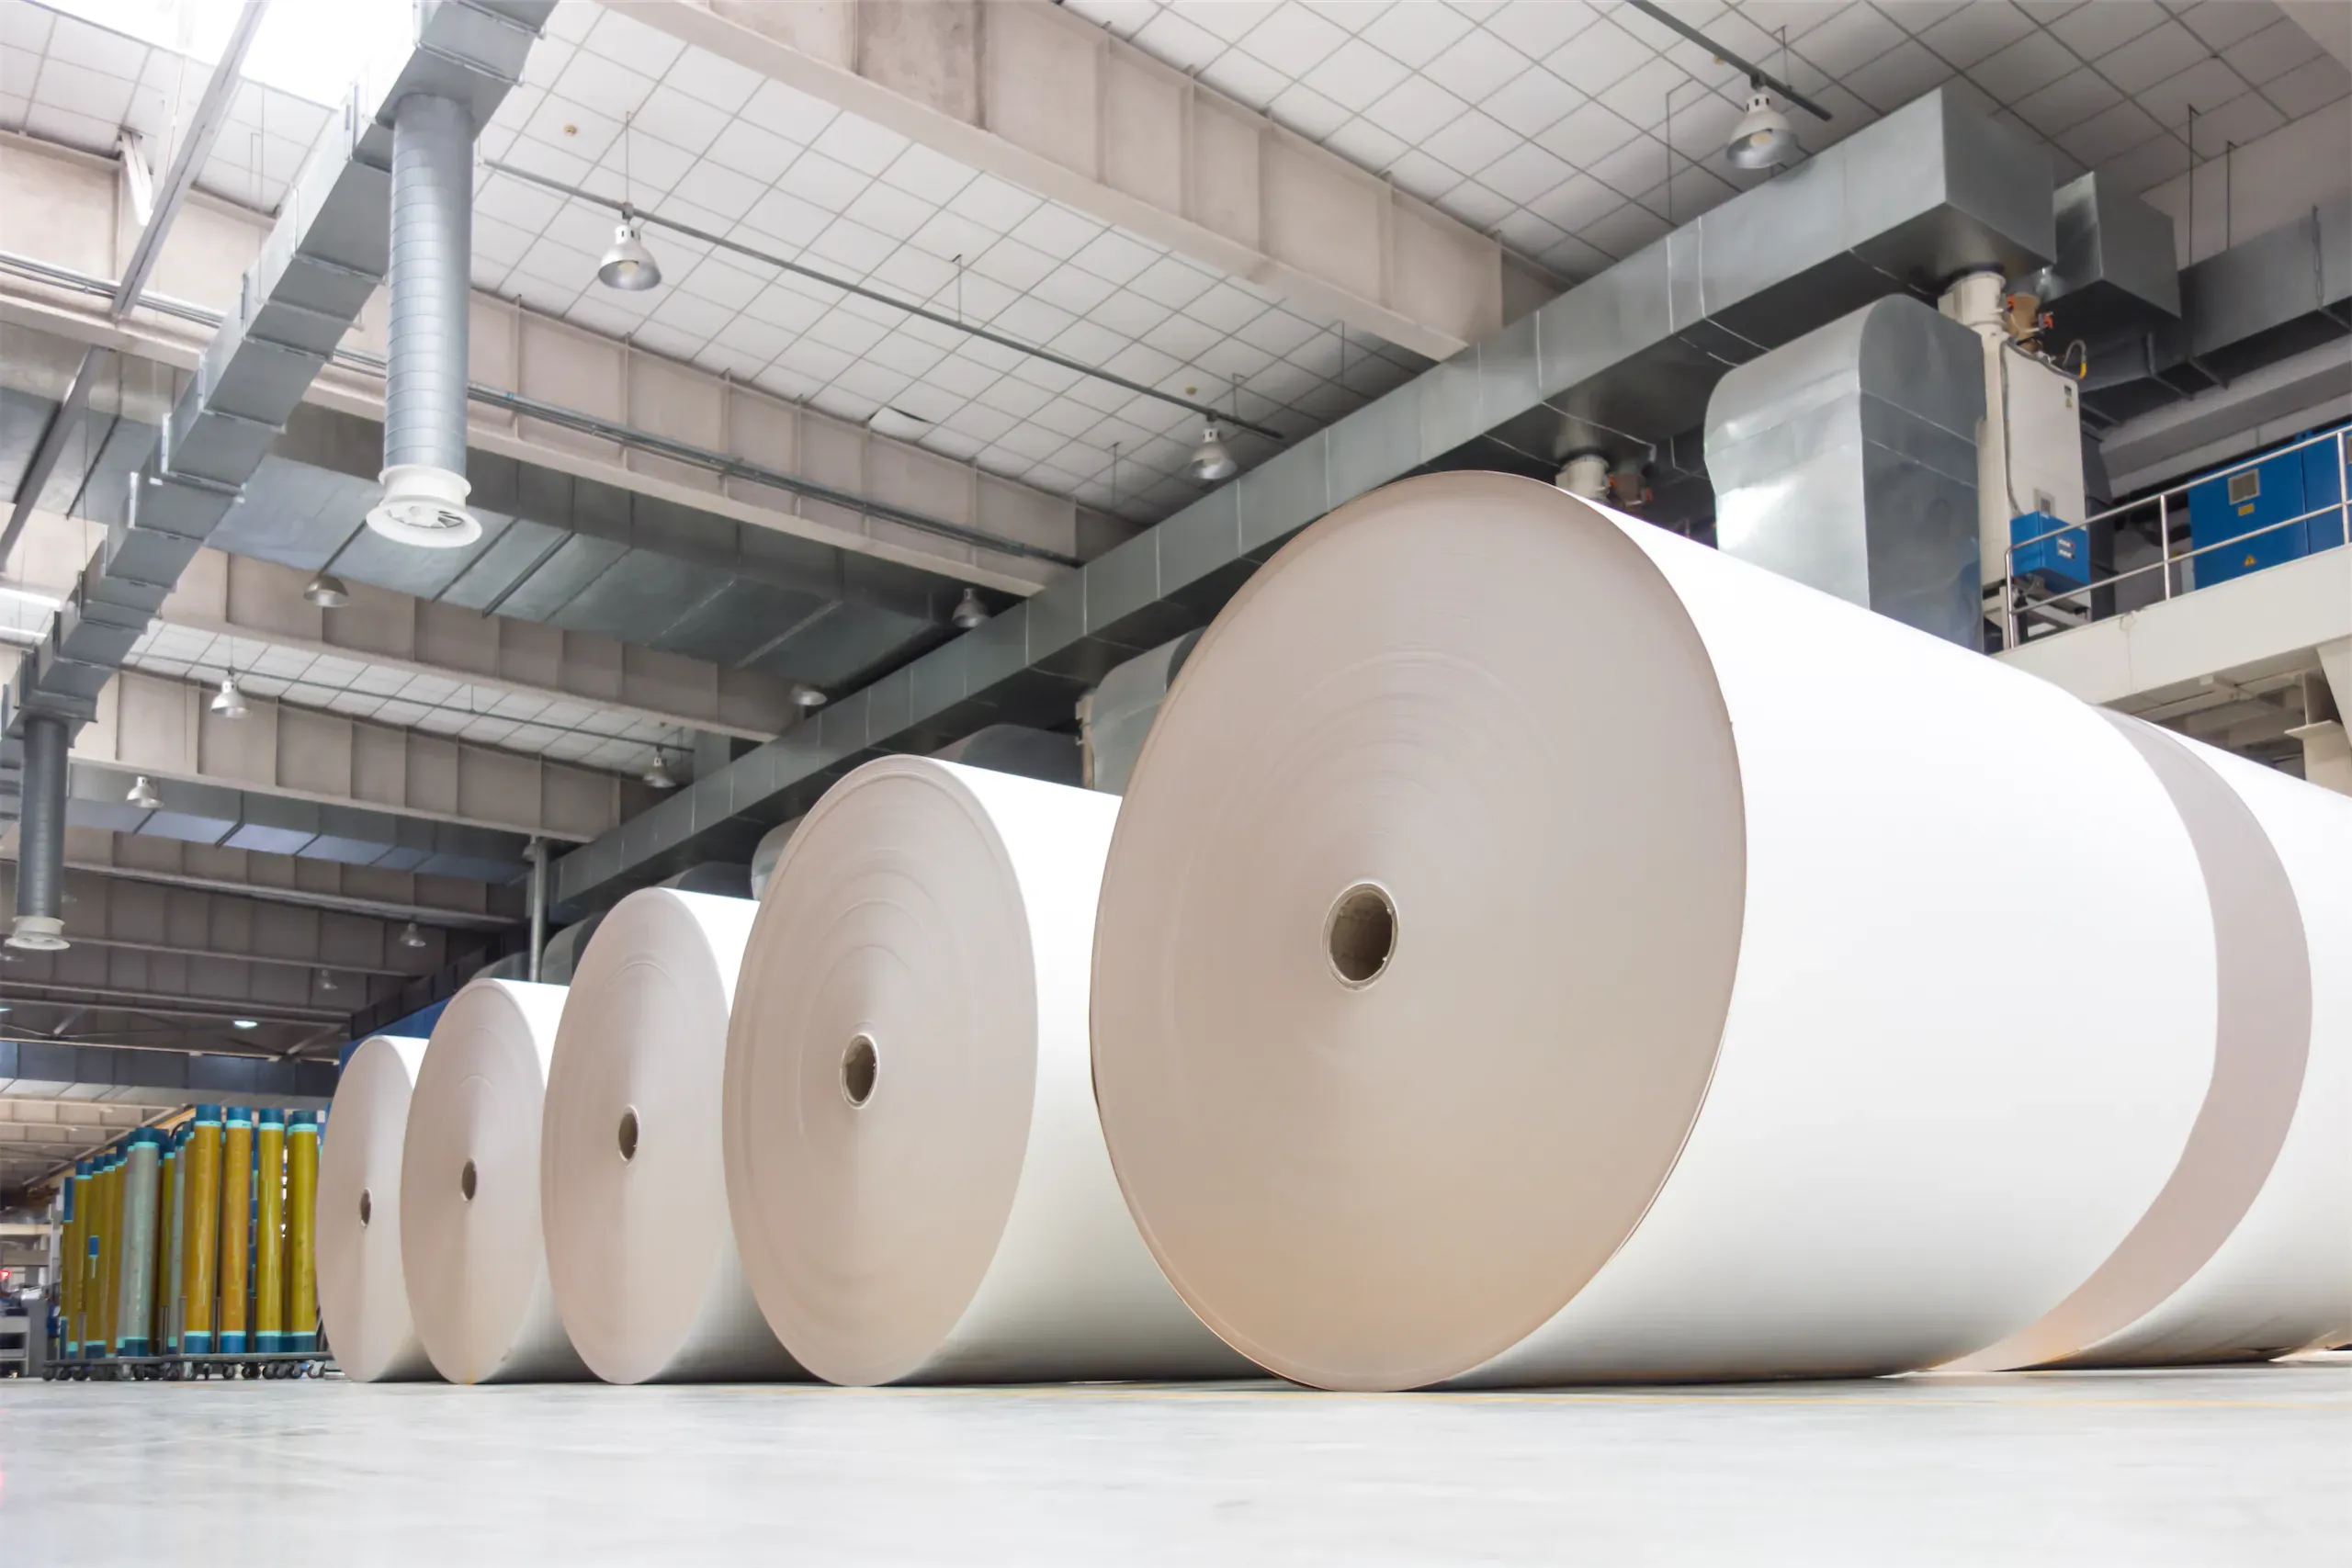 Many industrial-size rolls and stacks of paper wrapped and package in a large warehouse